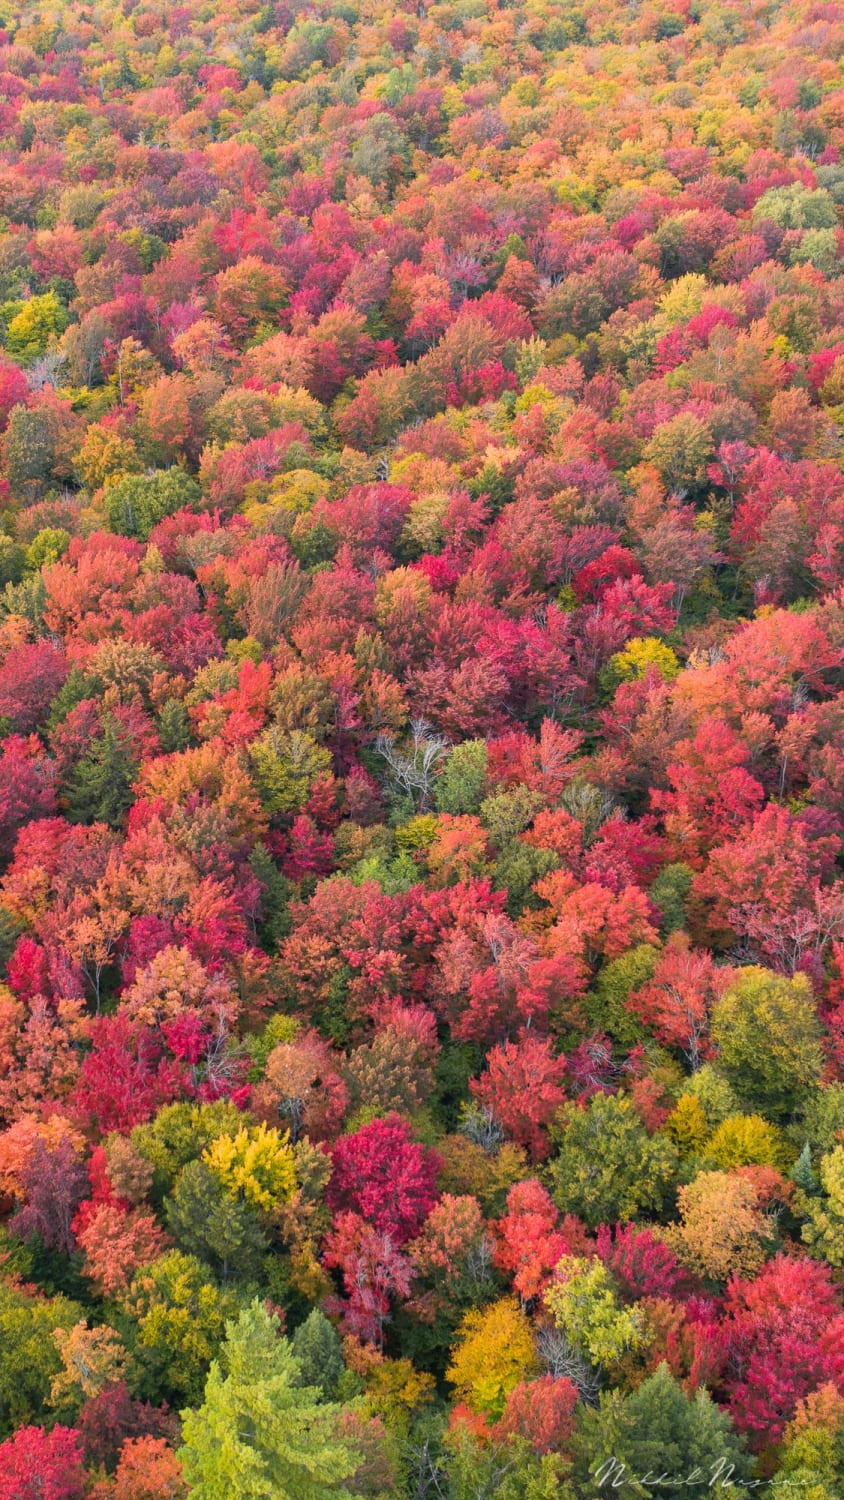 Fruity Pebbles. Fall in the Adirondack Mountains, NY. Full res file in comments.